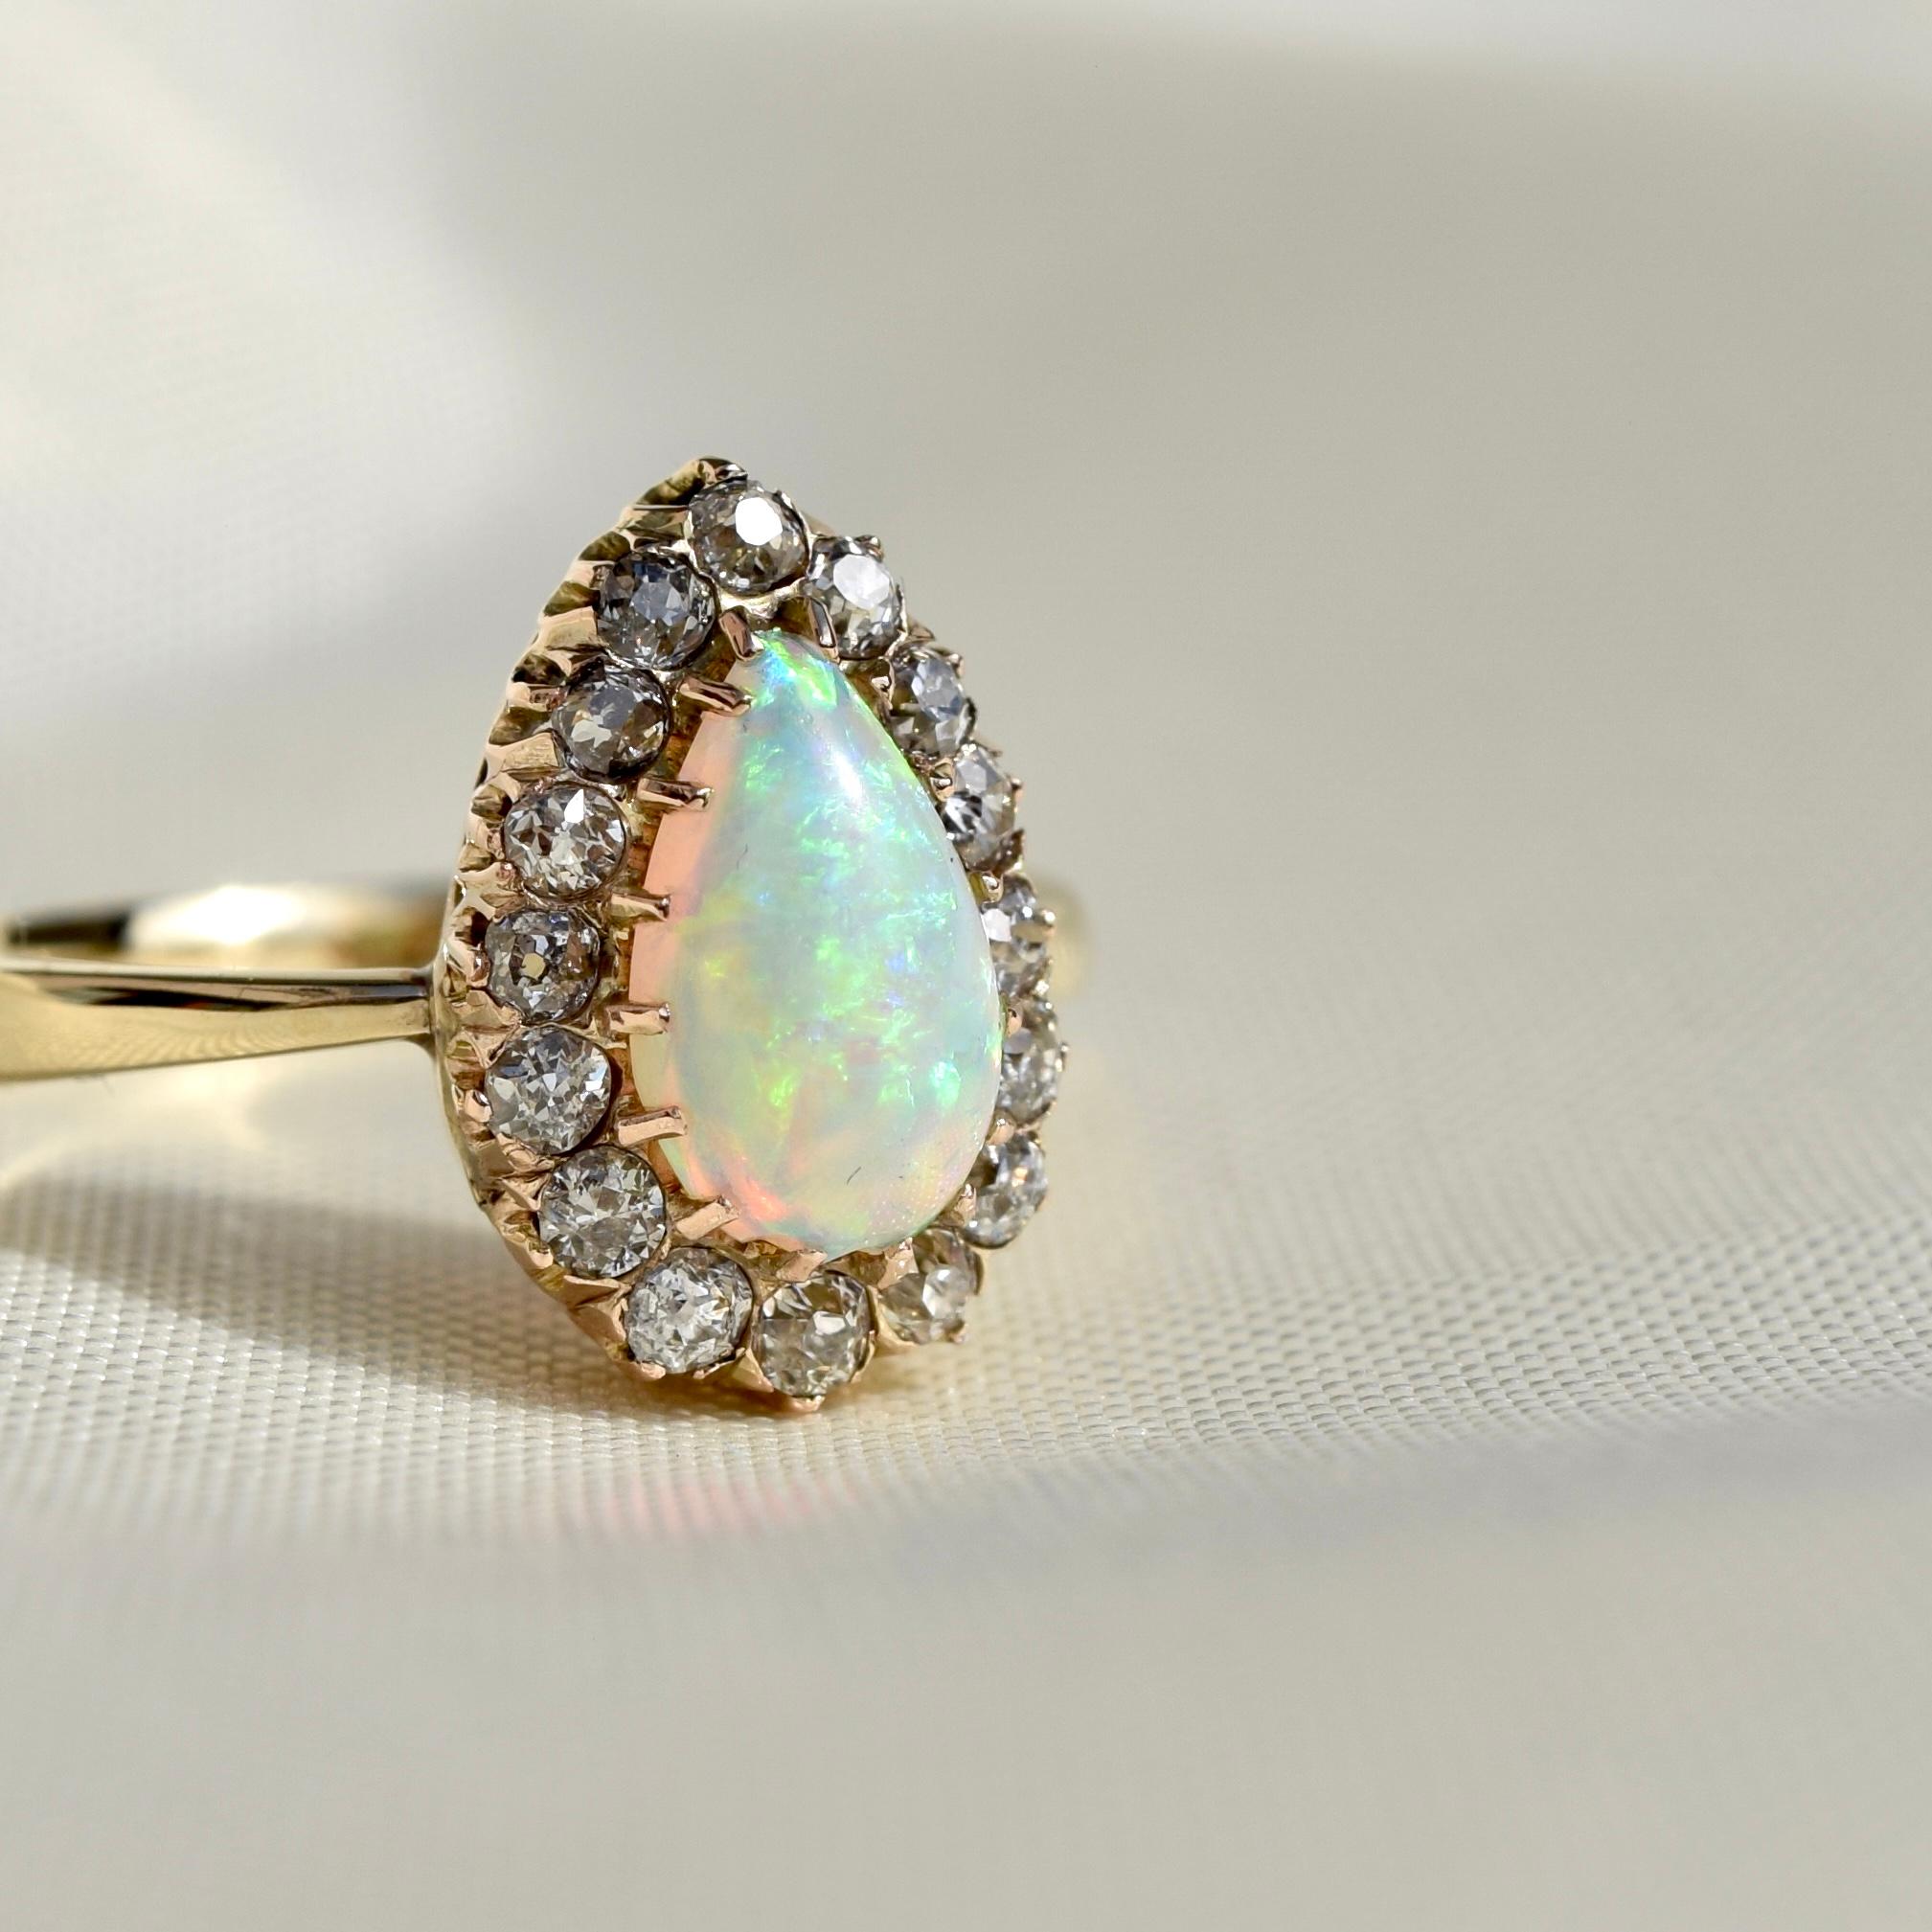 The head of this ring was made in France around 1900, the band was added recently. In excellent condition. 

- One natural opal cabochon, 8x5mm
- Sixteen old mine cut diamonds, each 1.5x1.5mm/ 0.02ct 
- Total diamond weight: approx. 0.32ct 
- 585/